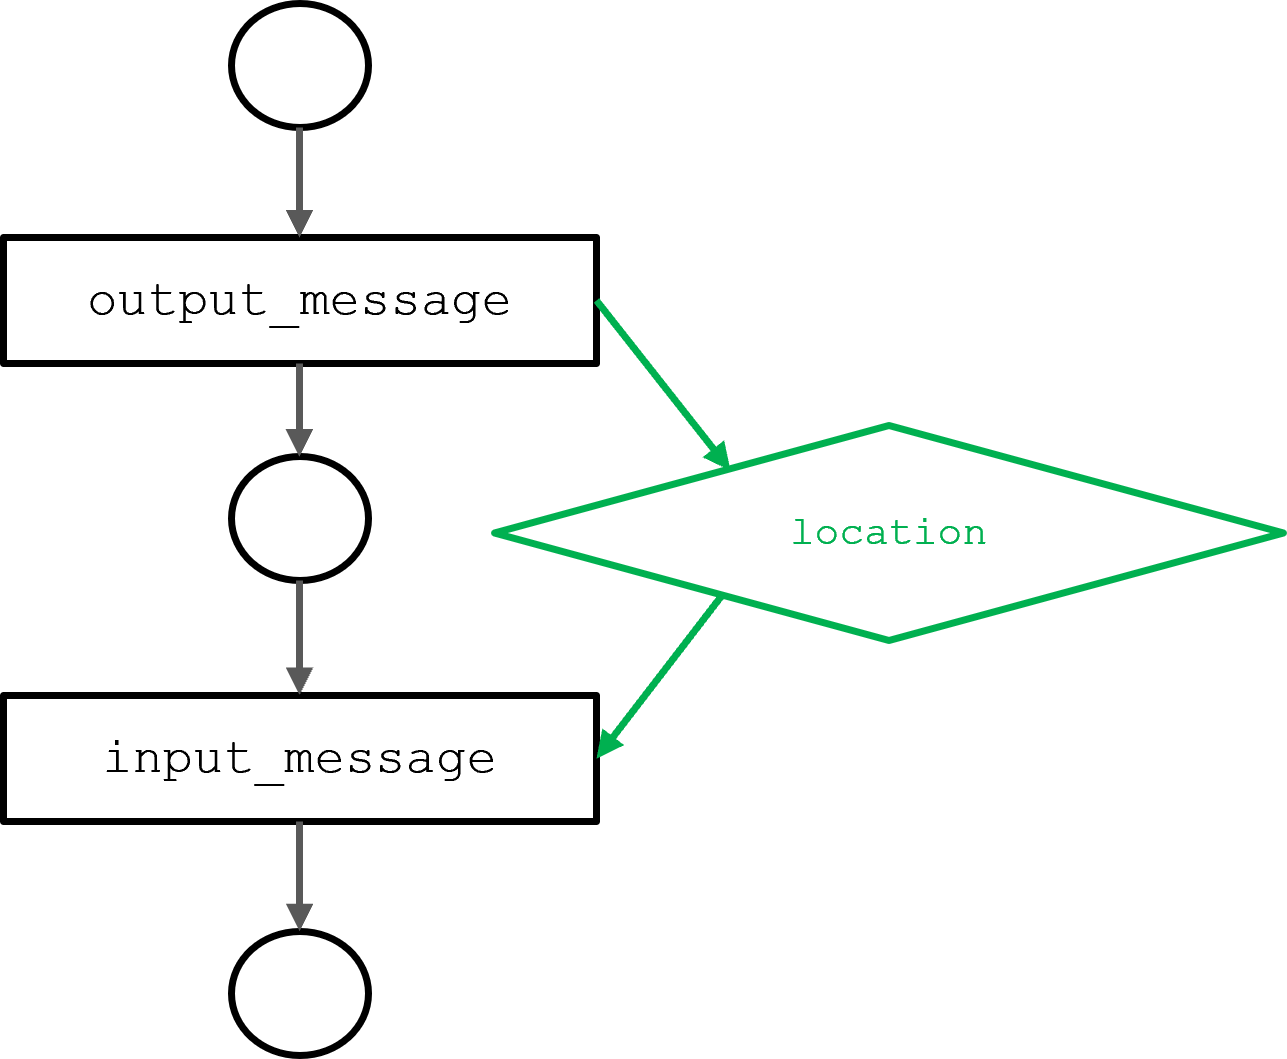 A state-based representation of the circles model that shows how an output message is associated with an input message, and the dependency on the location.